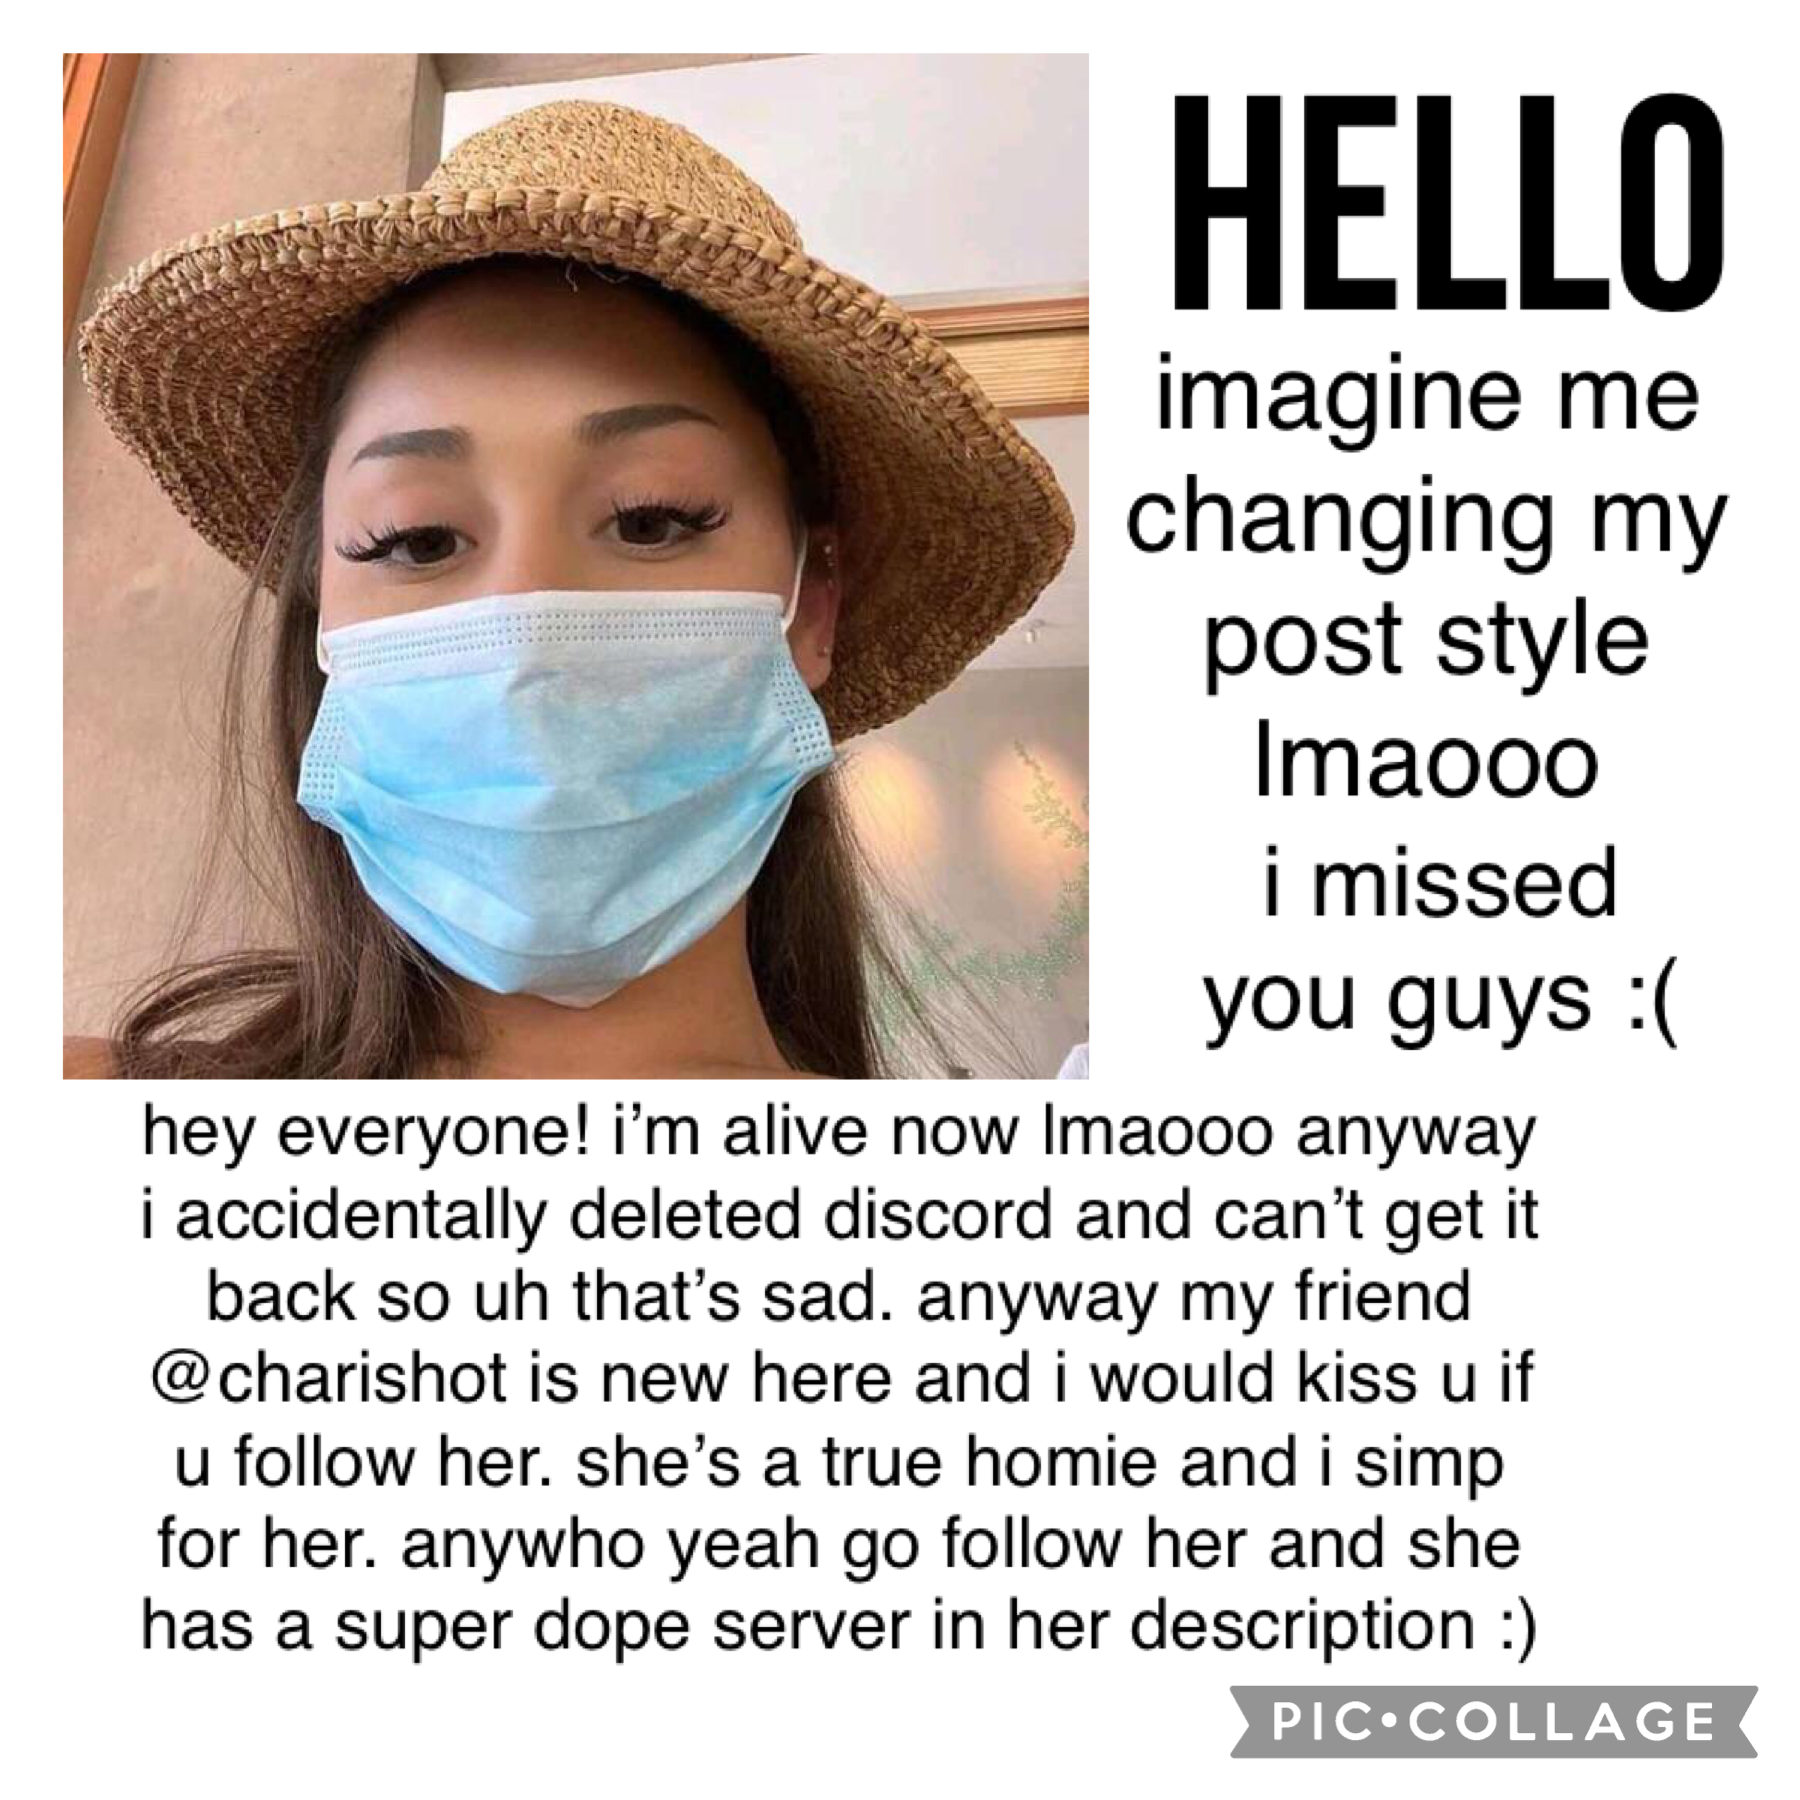 her name is @charishot (tap)
tell me how you’ve been! mostly been on discord but now i can’t bc my dumb🅰️ss deleted it 
anyway talk to me and follow char